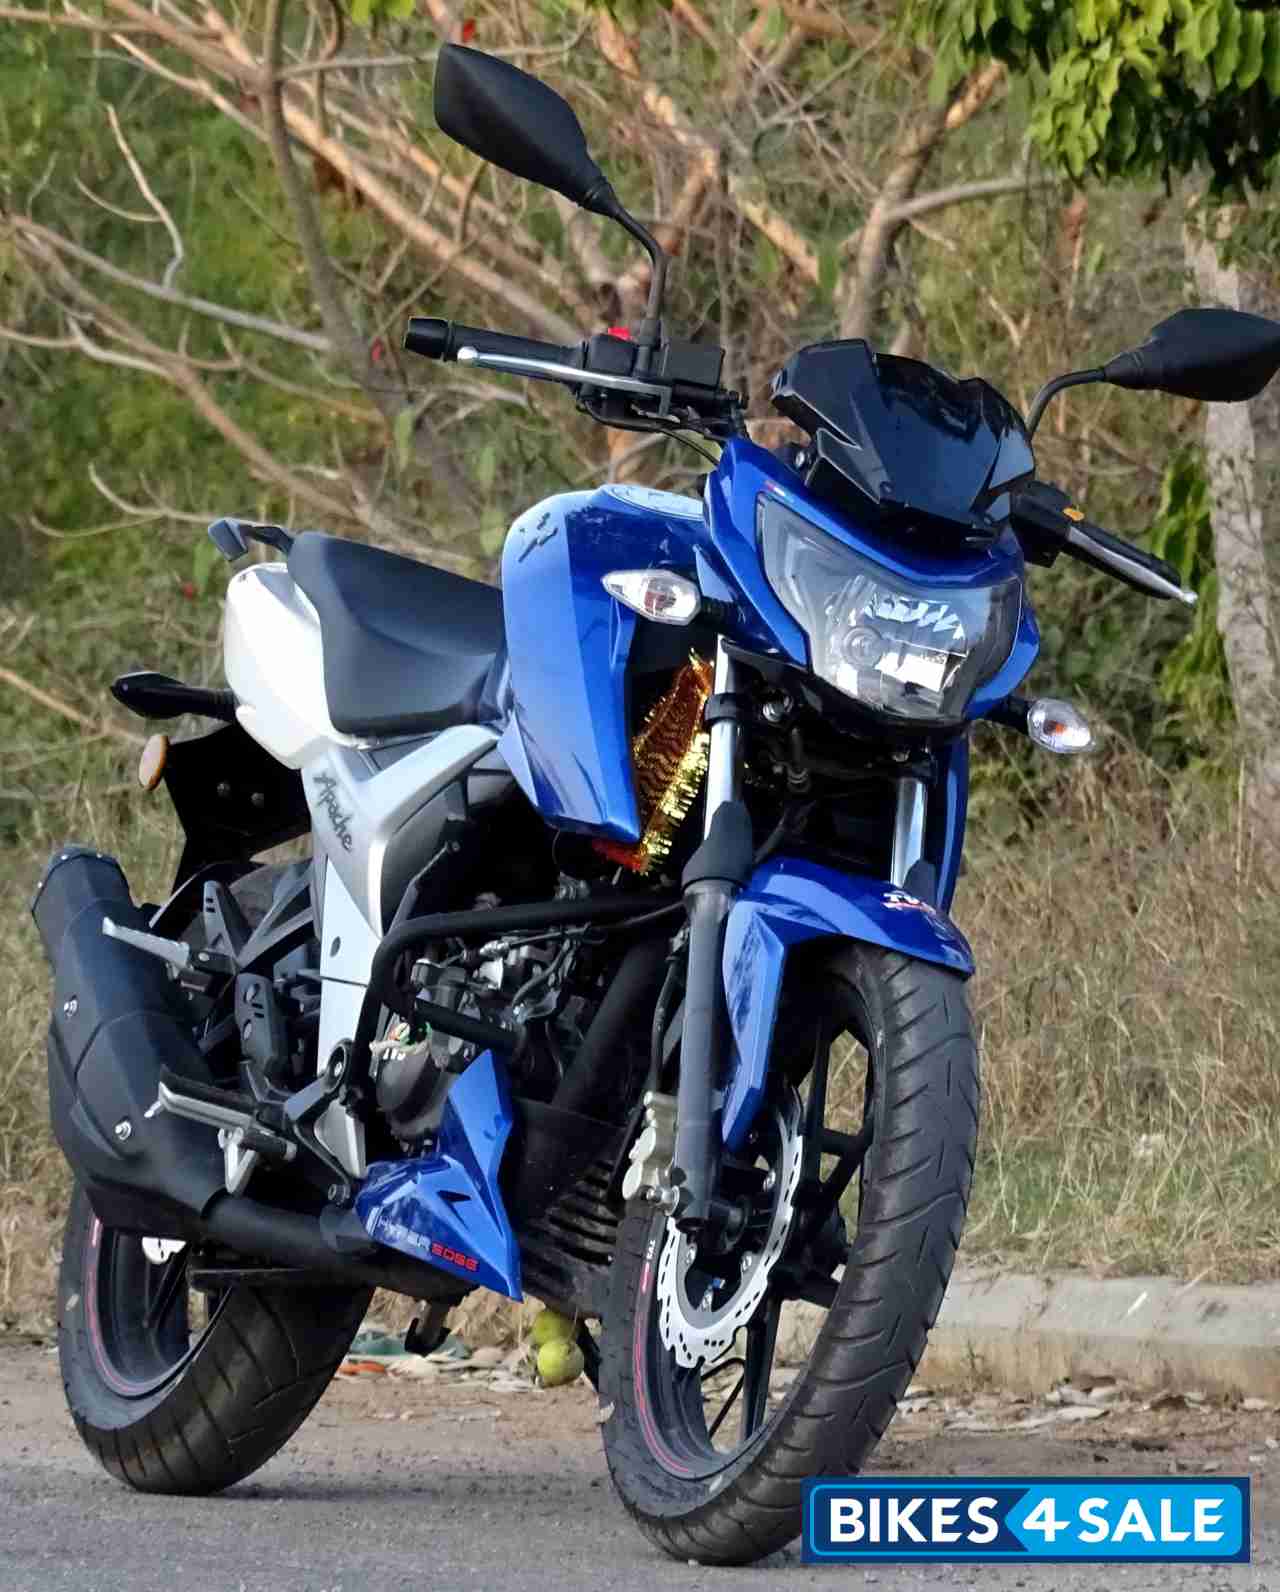 Used 18 Model Tvs Apache Rtr 160 4v For Sale In Hyderabad Id Bikes4sale